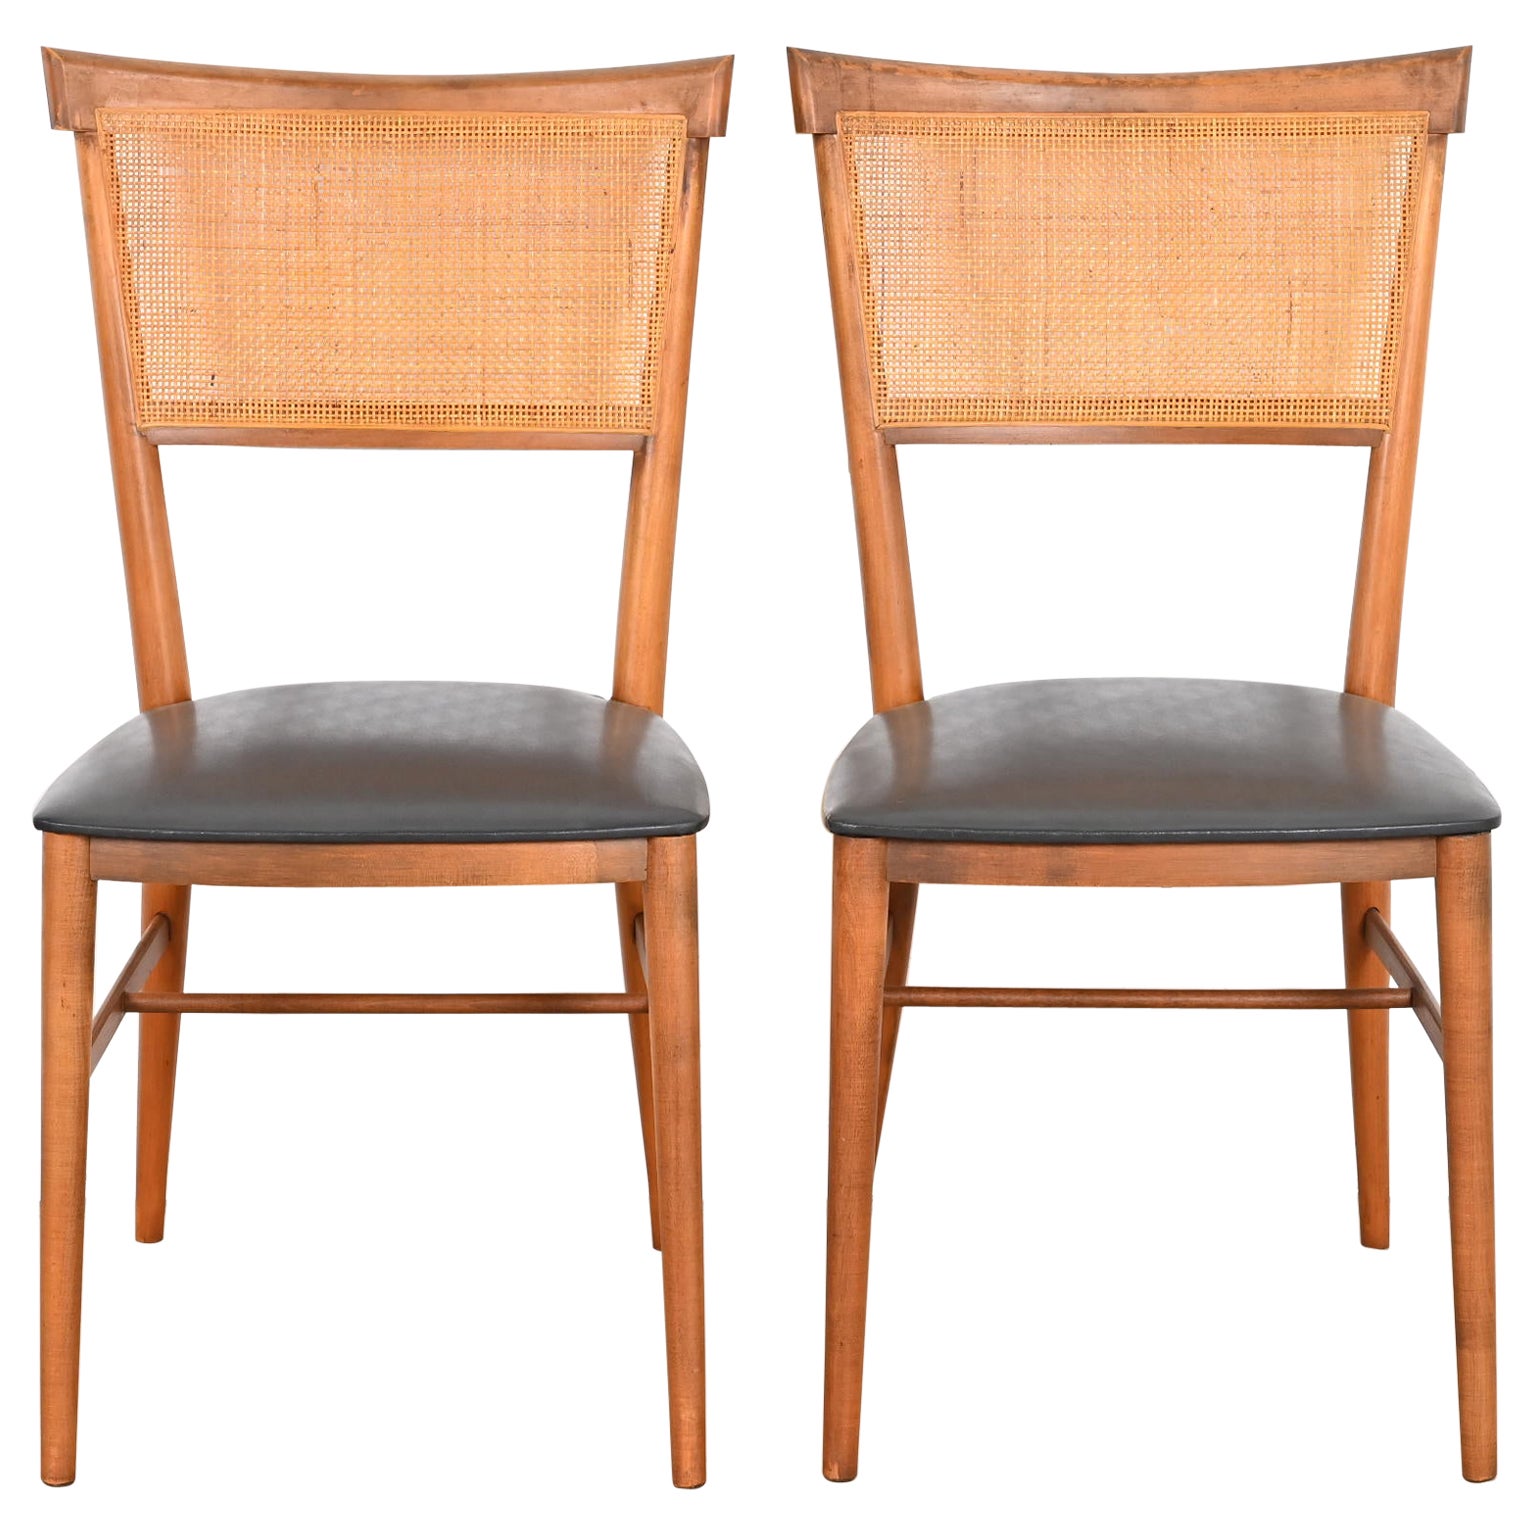 Paul McCobb Planner Group Birch and Cane Dining Chairs or Side Chairs, Pair